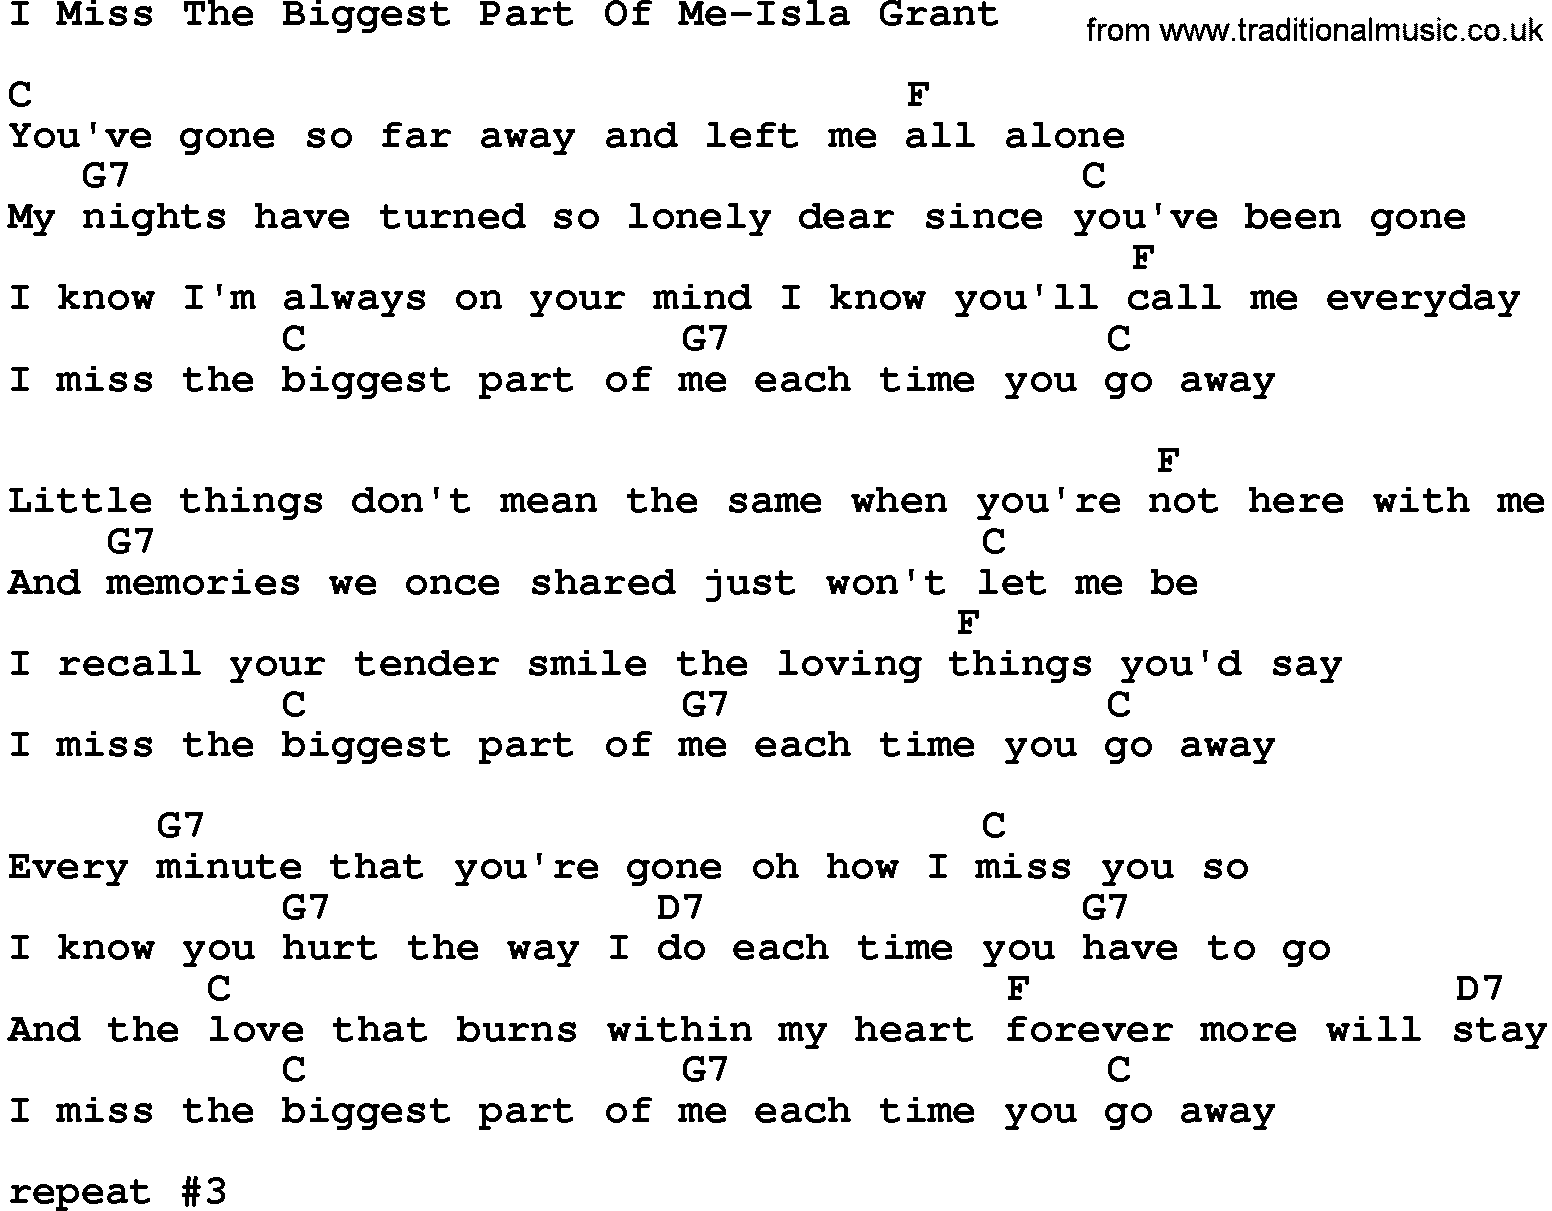 Country music song: I Miss The Biggest Part Of Me-Isla Grant lyrics and chords